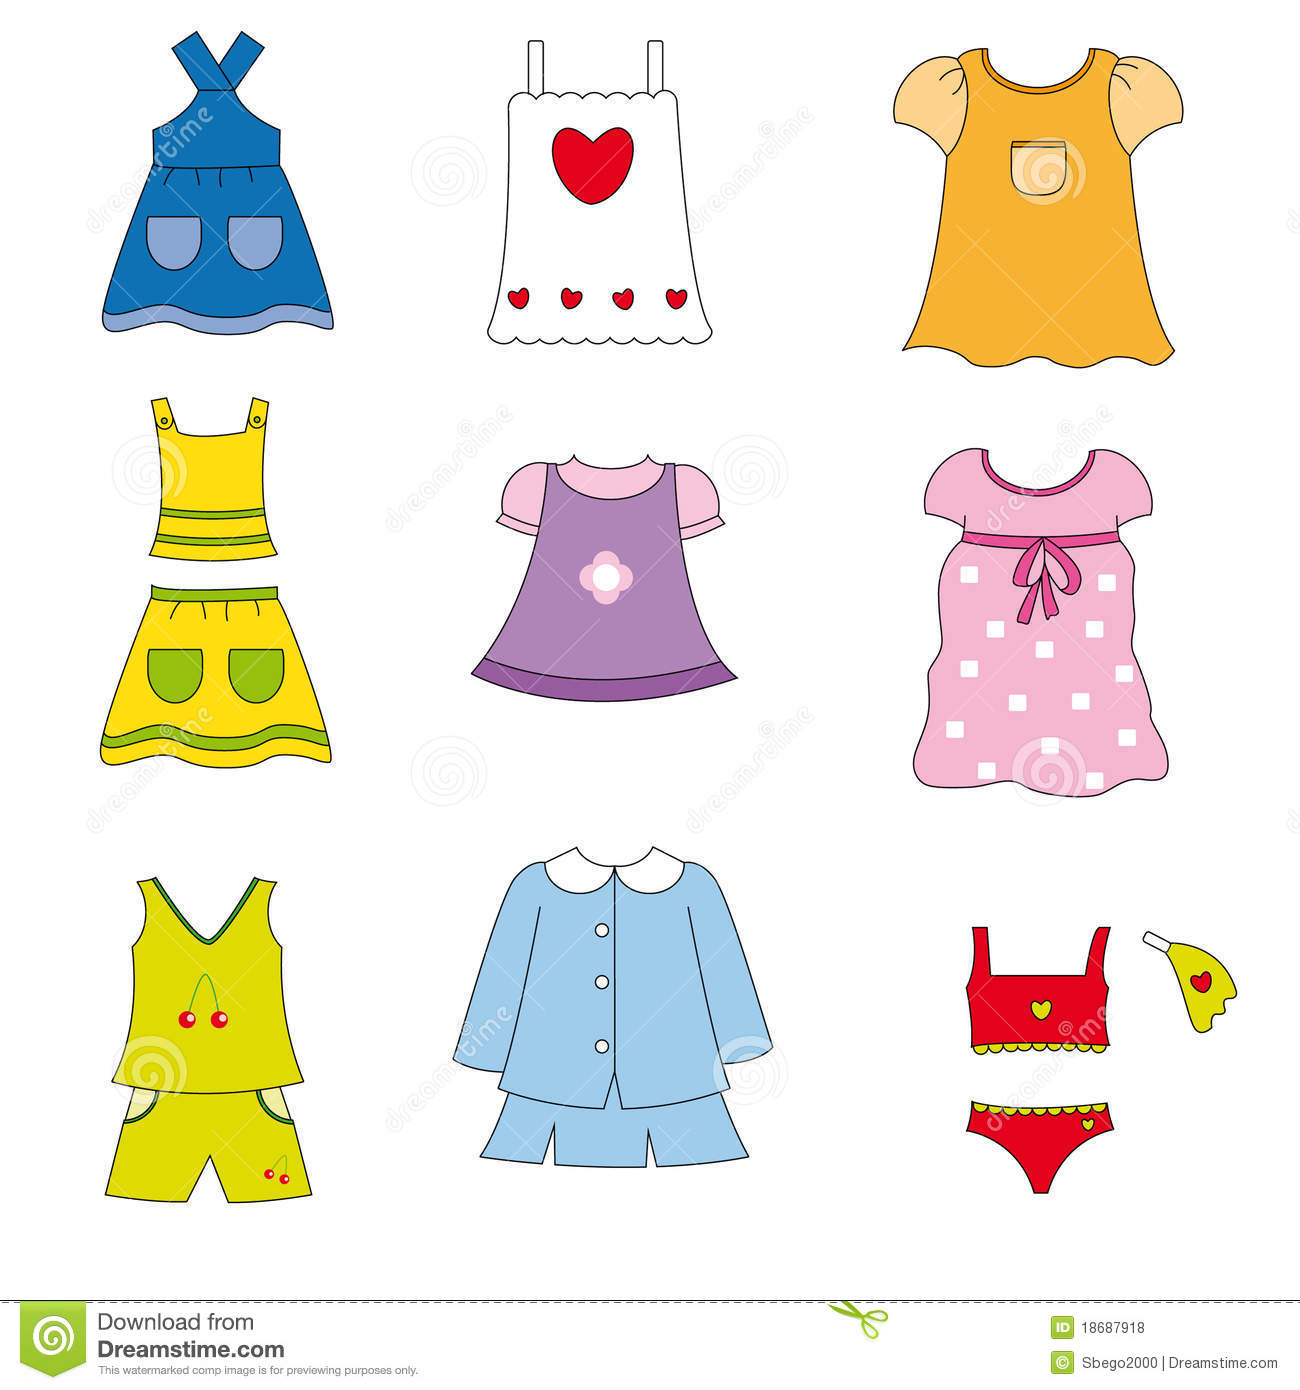 Best Online Collection Of Free To Use Clipart   Contact Us   Privacy